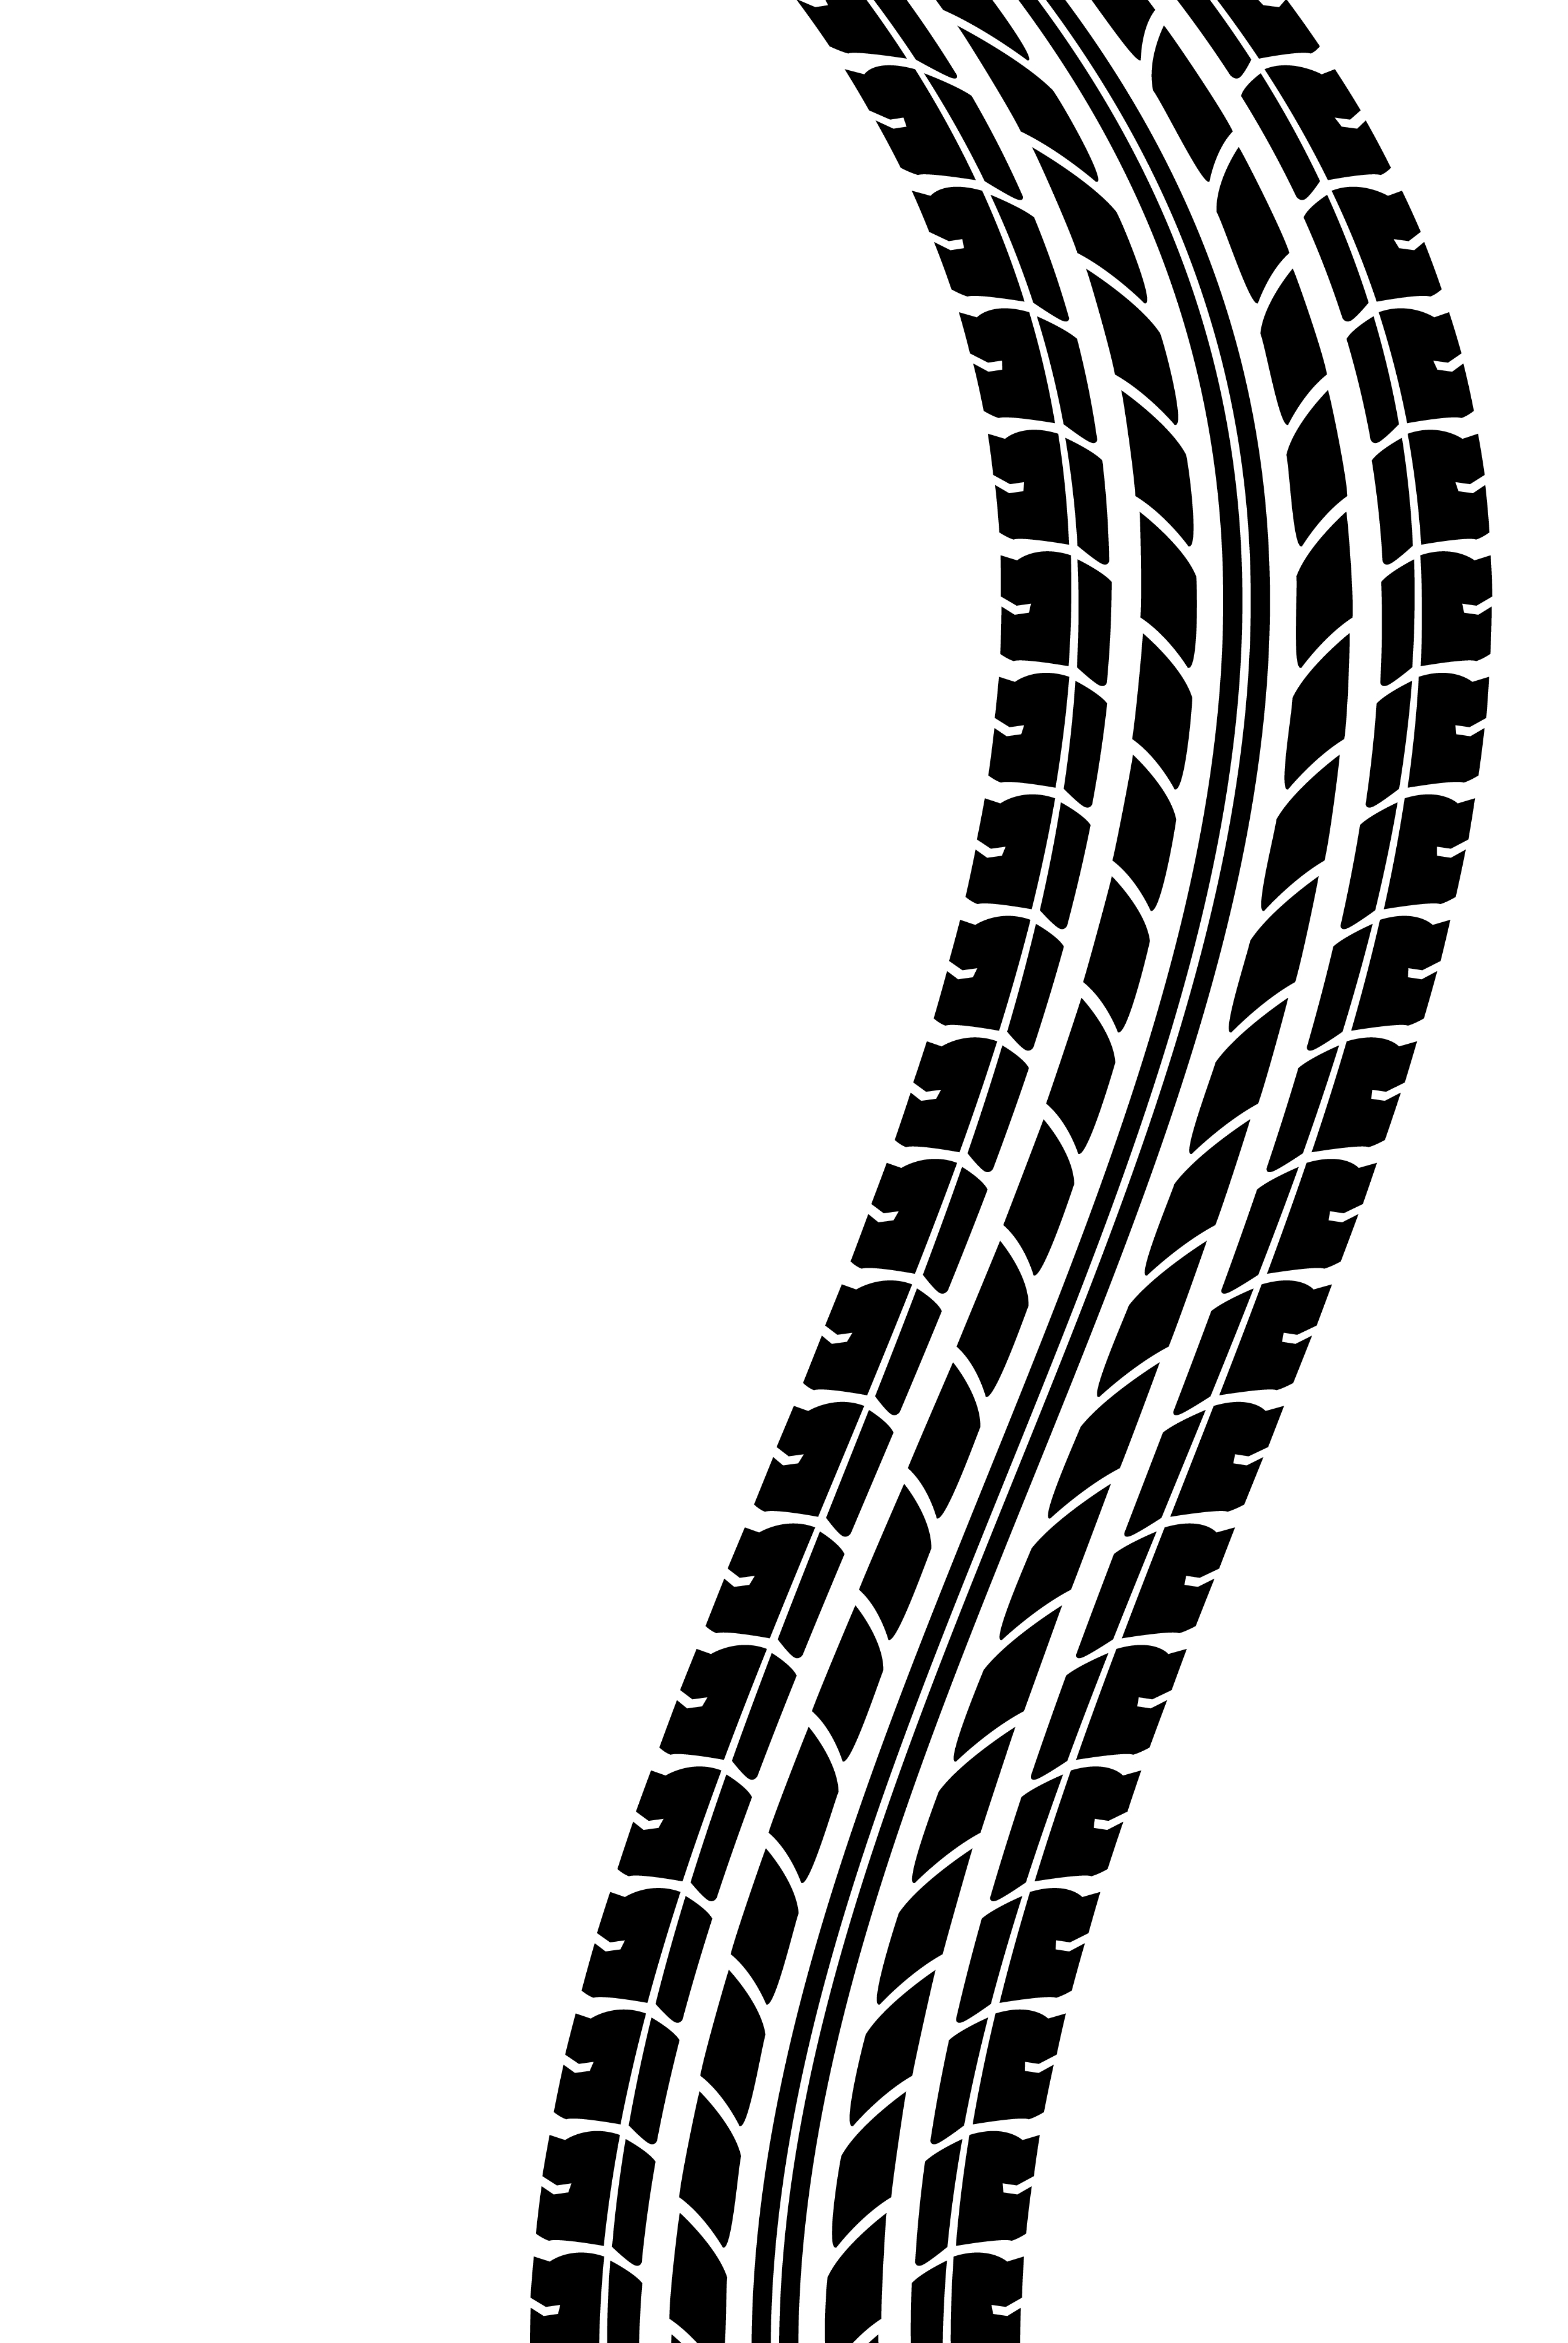 Photo Tire Track Tyre Wheel Car Vector Clipart Stock Image Clipart ...